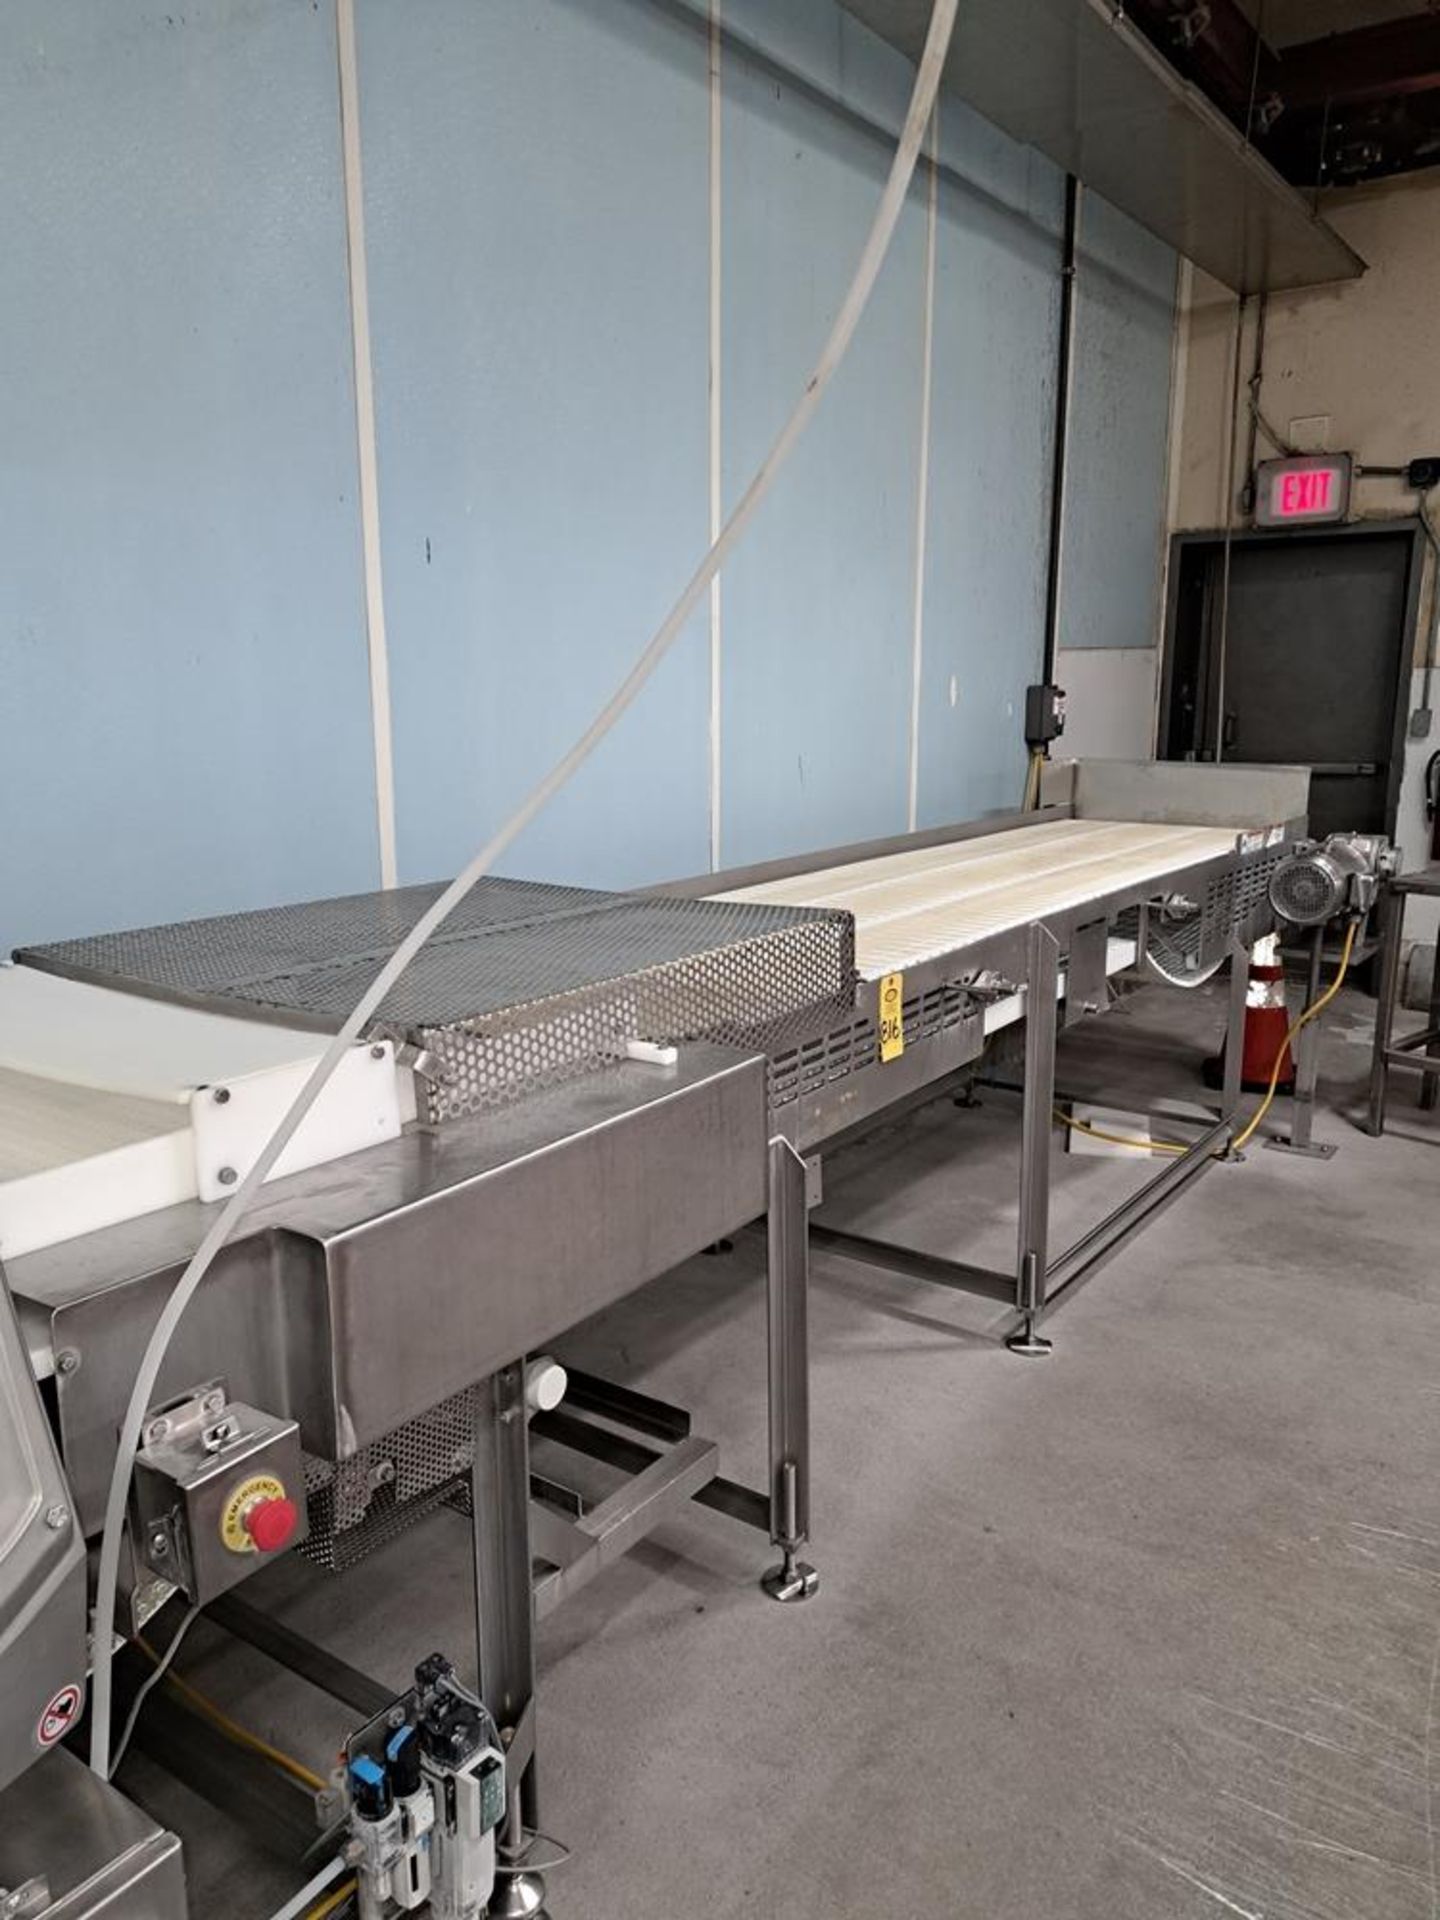 Belly Transfer Conveyor, 32" W X 12' L intralox belt: Required Loading Fee $400.00, Rigger-Norm